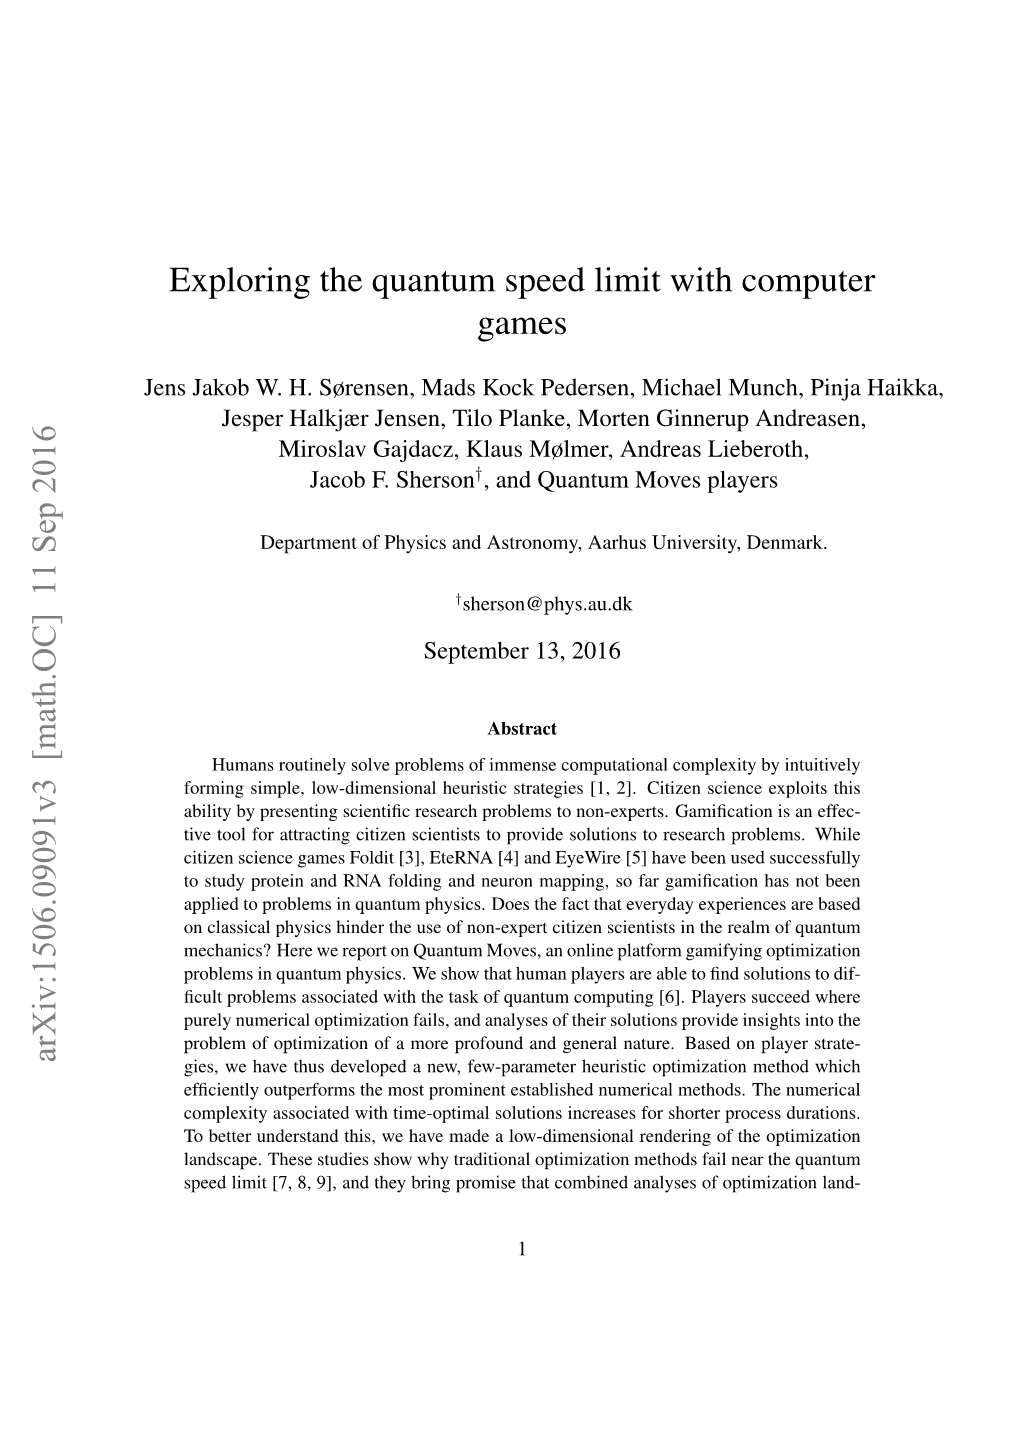 Exploring the Quantum Speed Limit with Computer Games